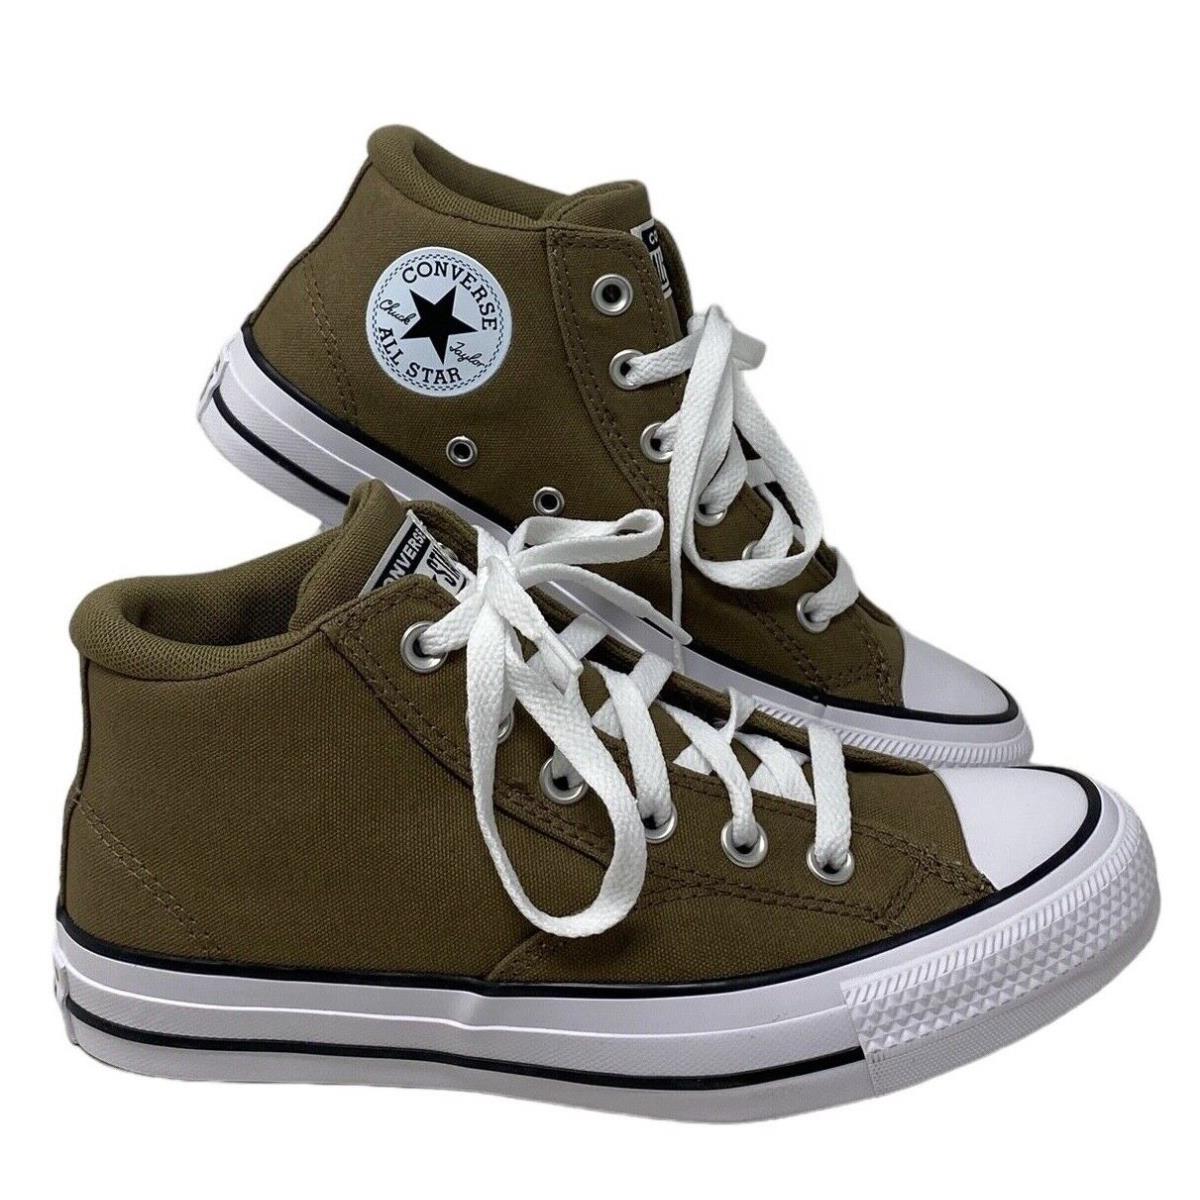 Converse Chuck Taylor Malden Street Mid Canvas Brown Shoes For Men Skate A05408F